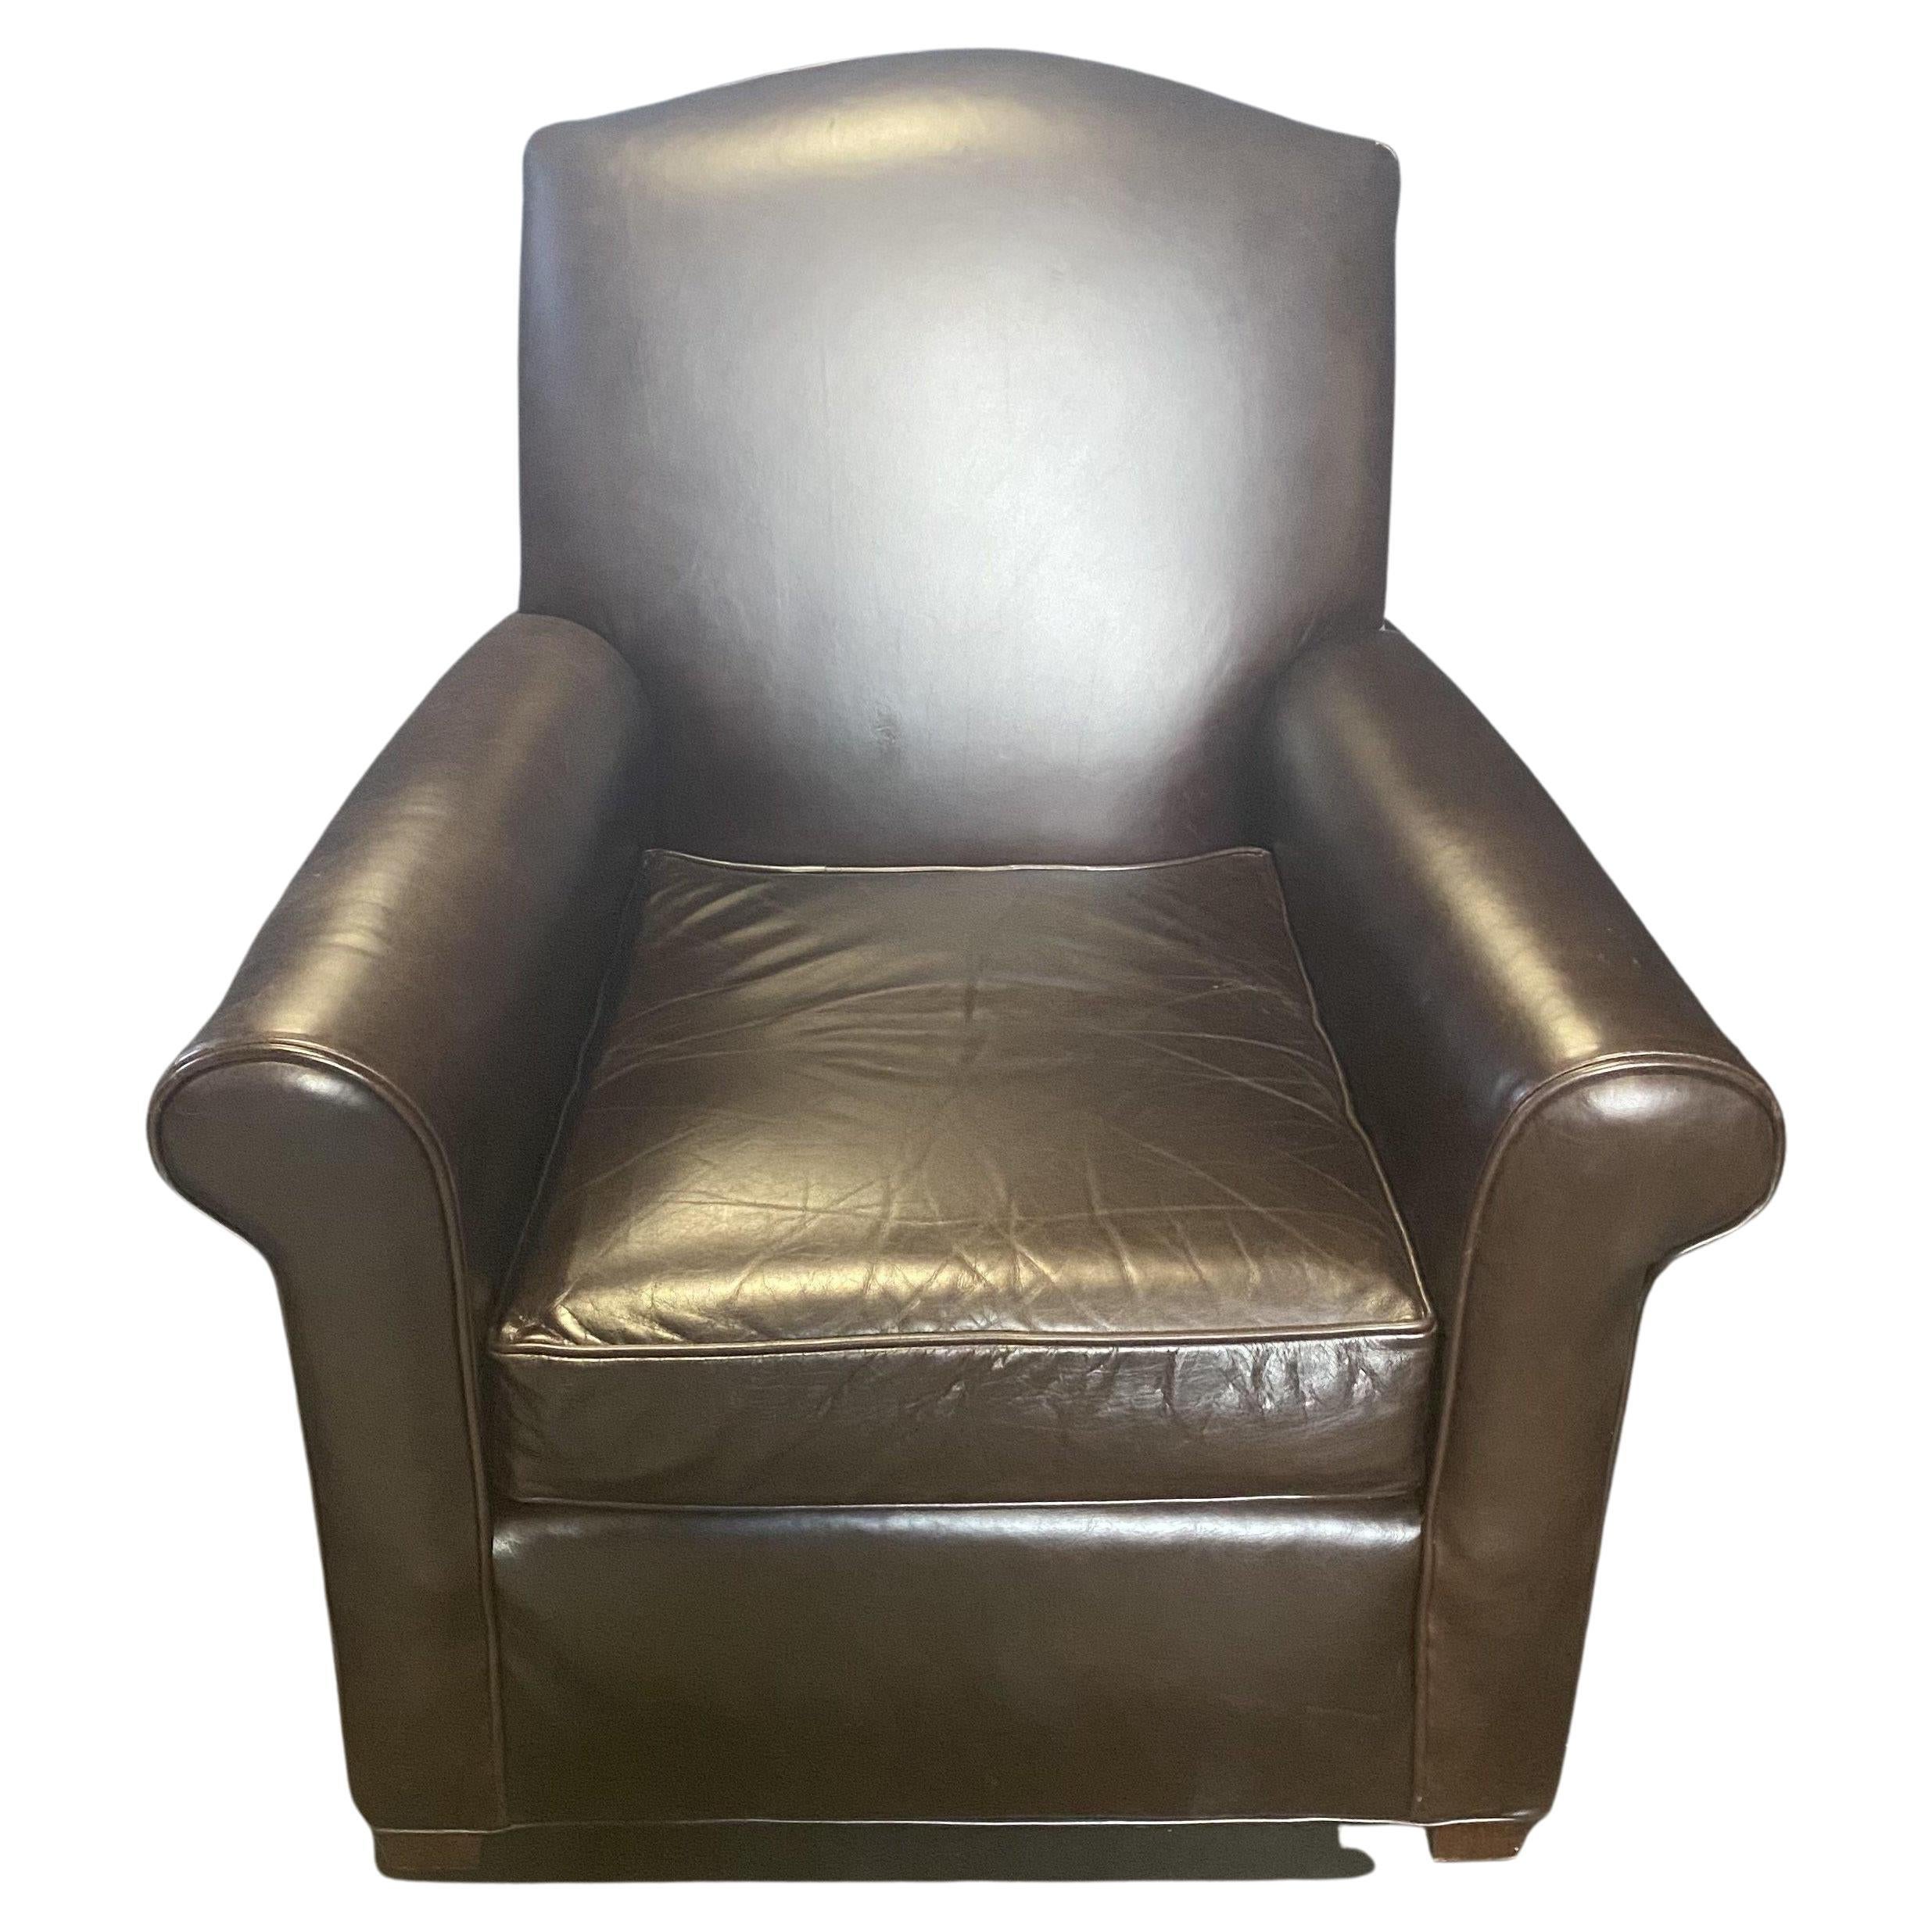 Vintage dark tobacco brown leather club chair and matching ottoman by San Francisco designer Mitchell Gold. The back, arms and seat have a lovely piping detail. #5607
 Measures: H ottoman 16” W ottoman 27.5” D ottoman 23” 
 H chair arm 24” W.

